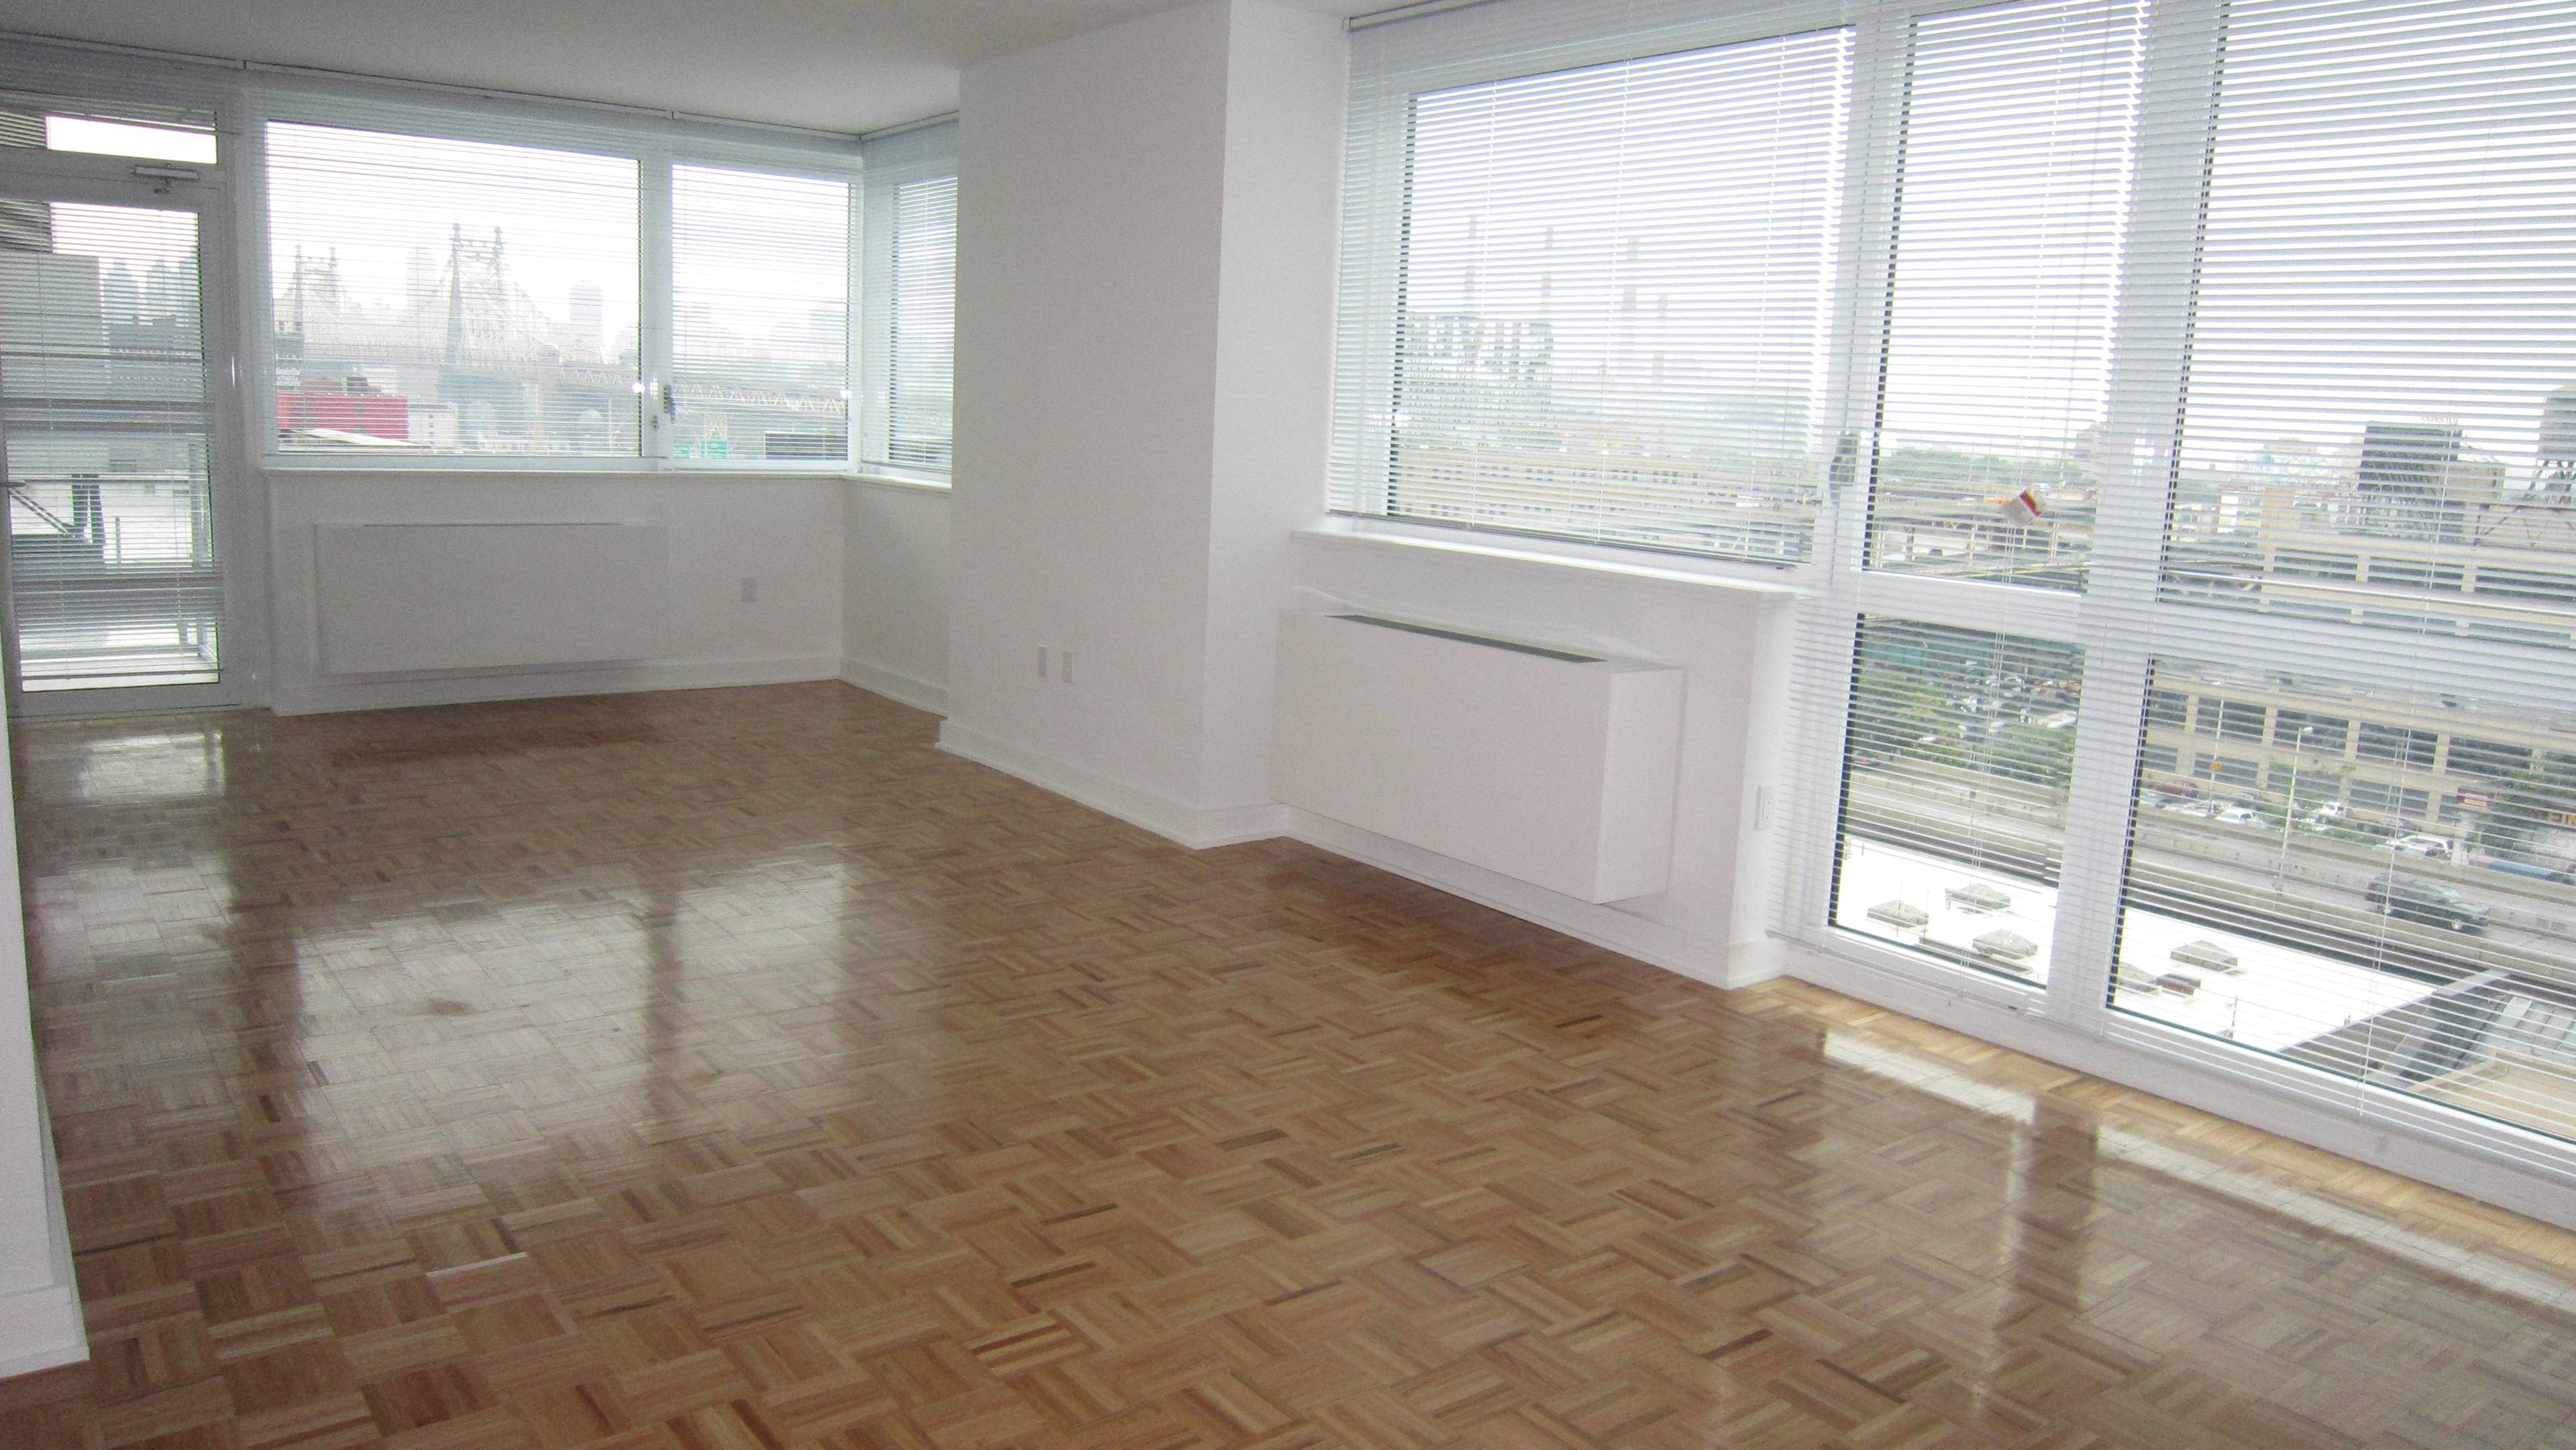 High Floor One Bedroom w/ Washer & Dryer and Stunning Views! Be the first to live in this brand new Long Island City Building - No Fee, One Month Free To Tenants, Gym, Roof Deck, Basket Ball Court & More.